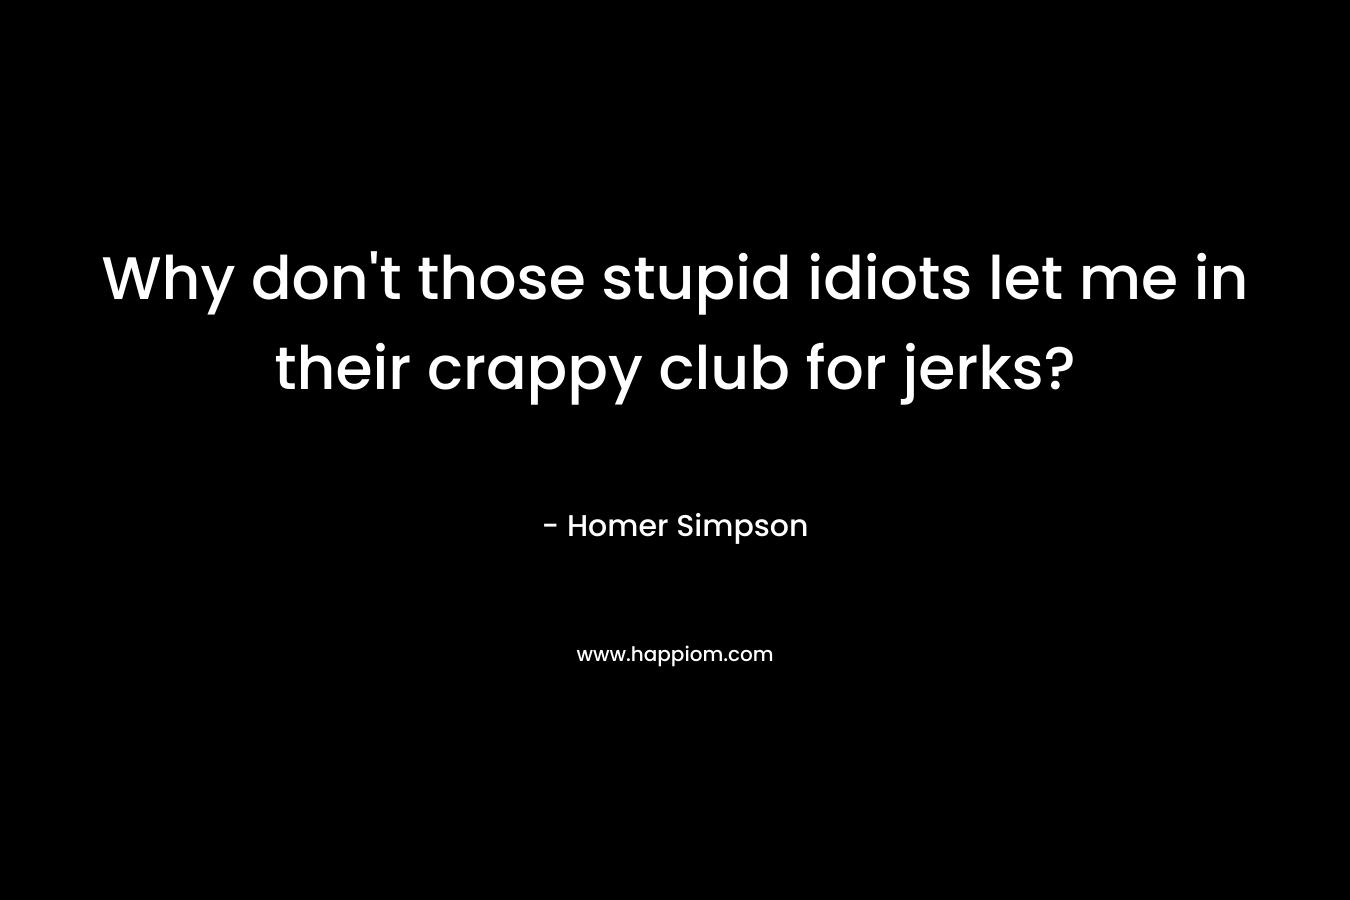 Why don't those stupid idiots let me in their crappy club for jerks?